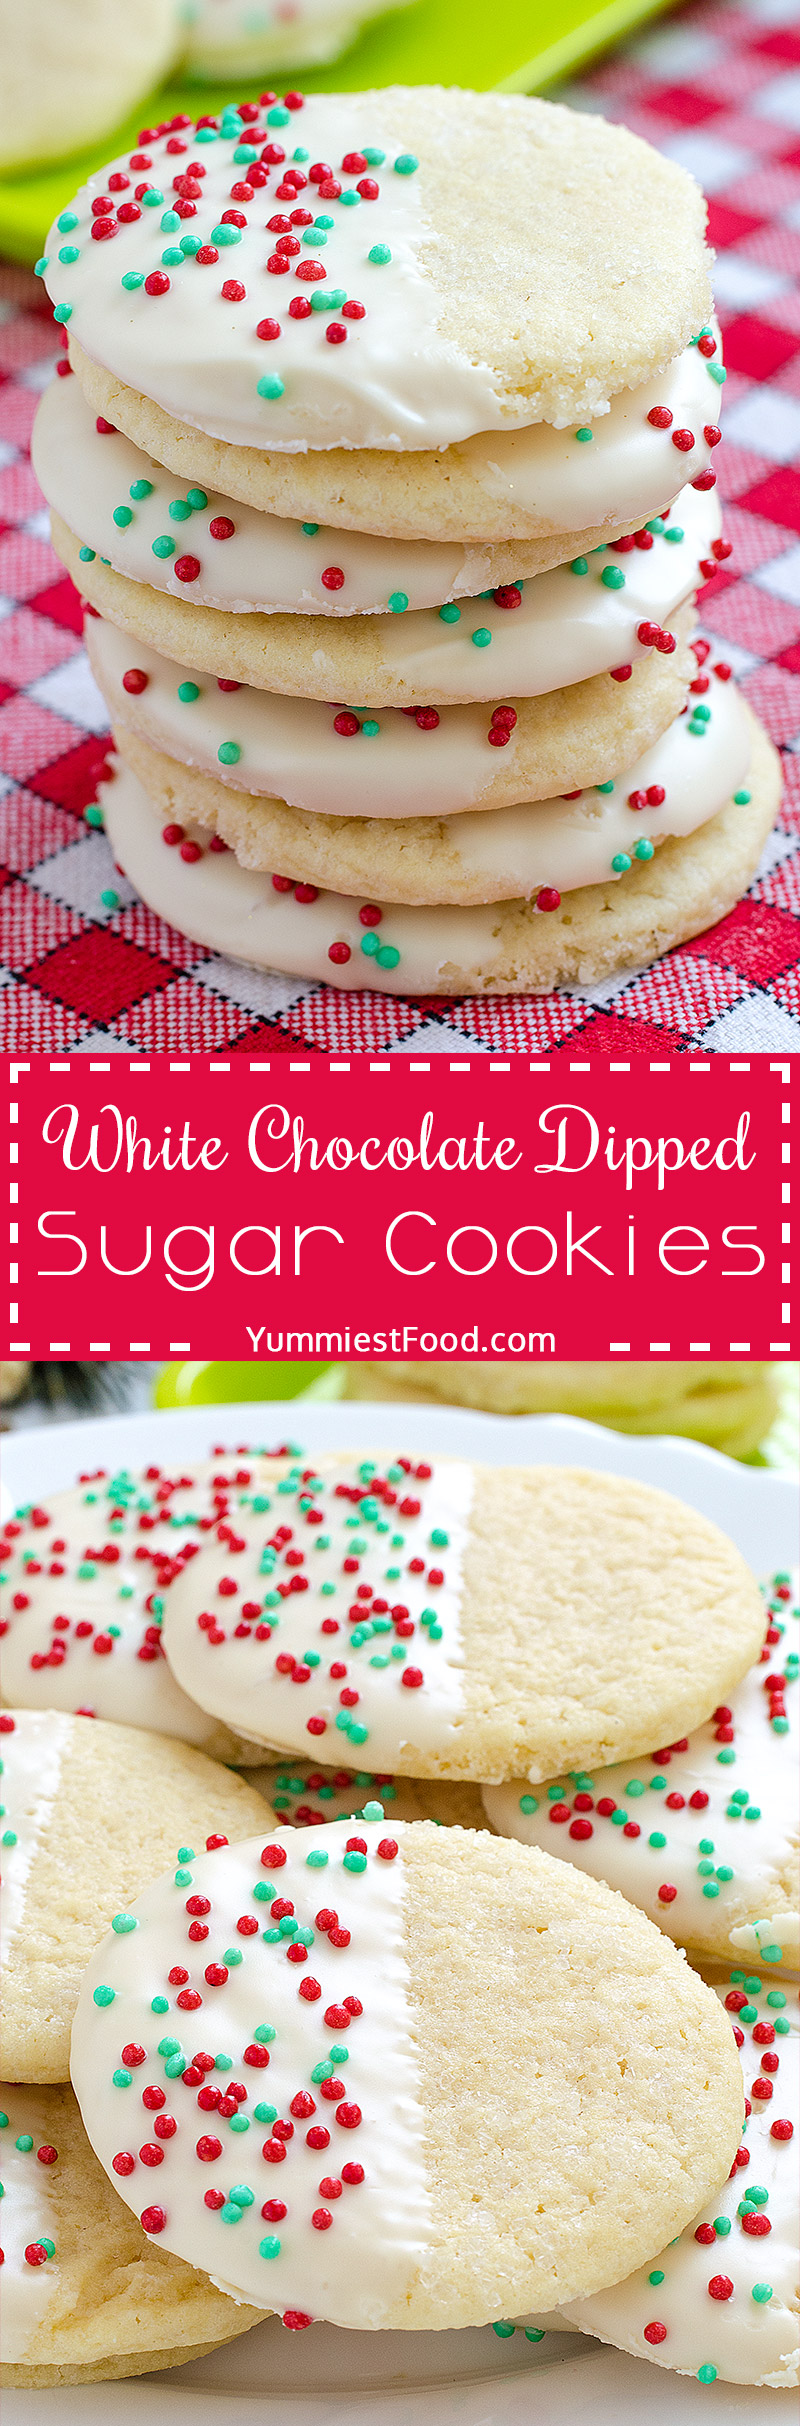 White Chocolate Dipped Sugar Cookies - a Christmas cookies must! So delicious, cute and very easy to make.